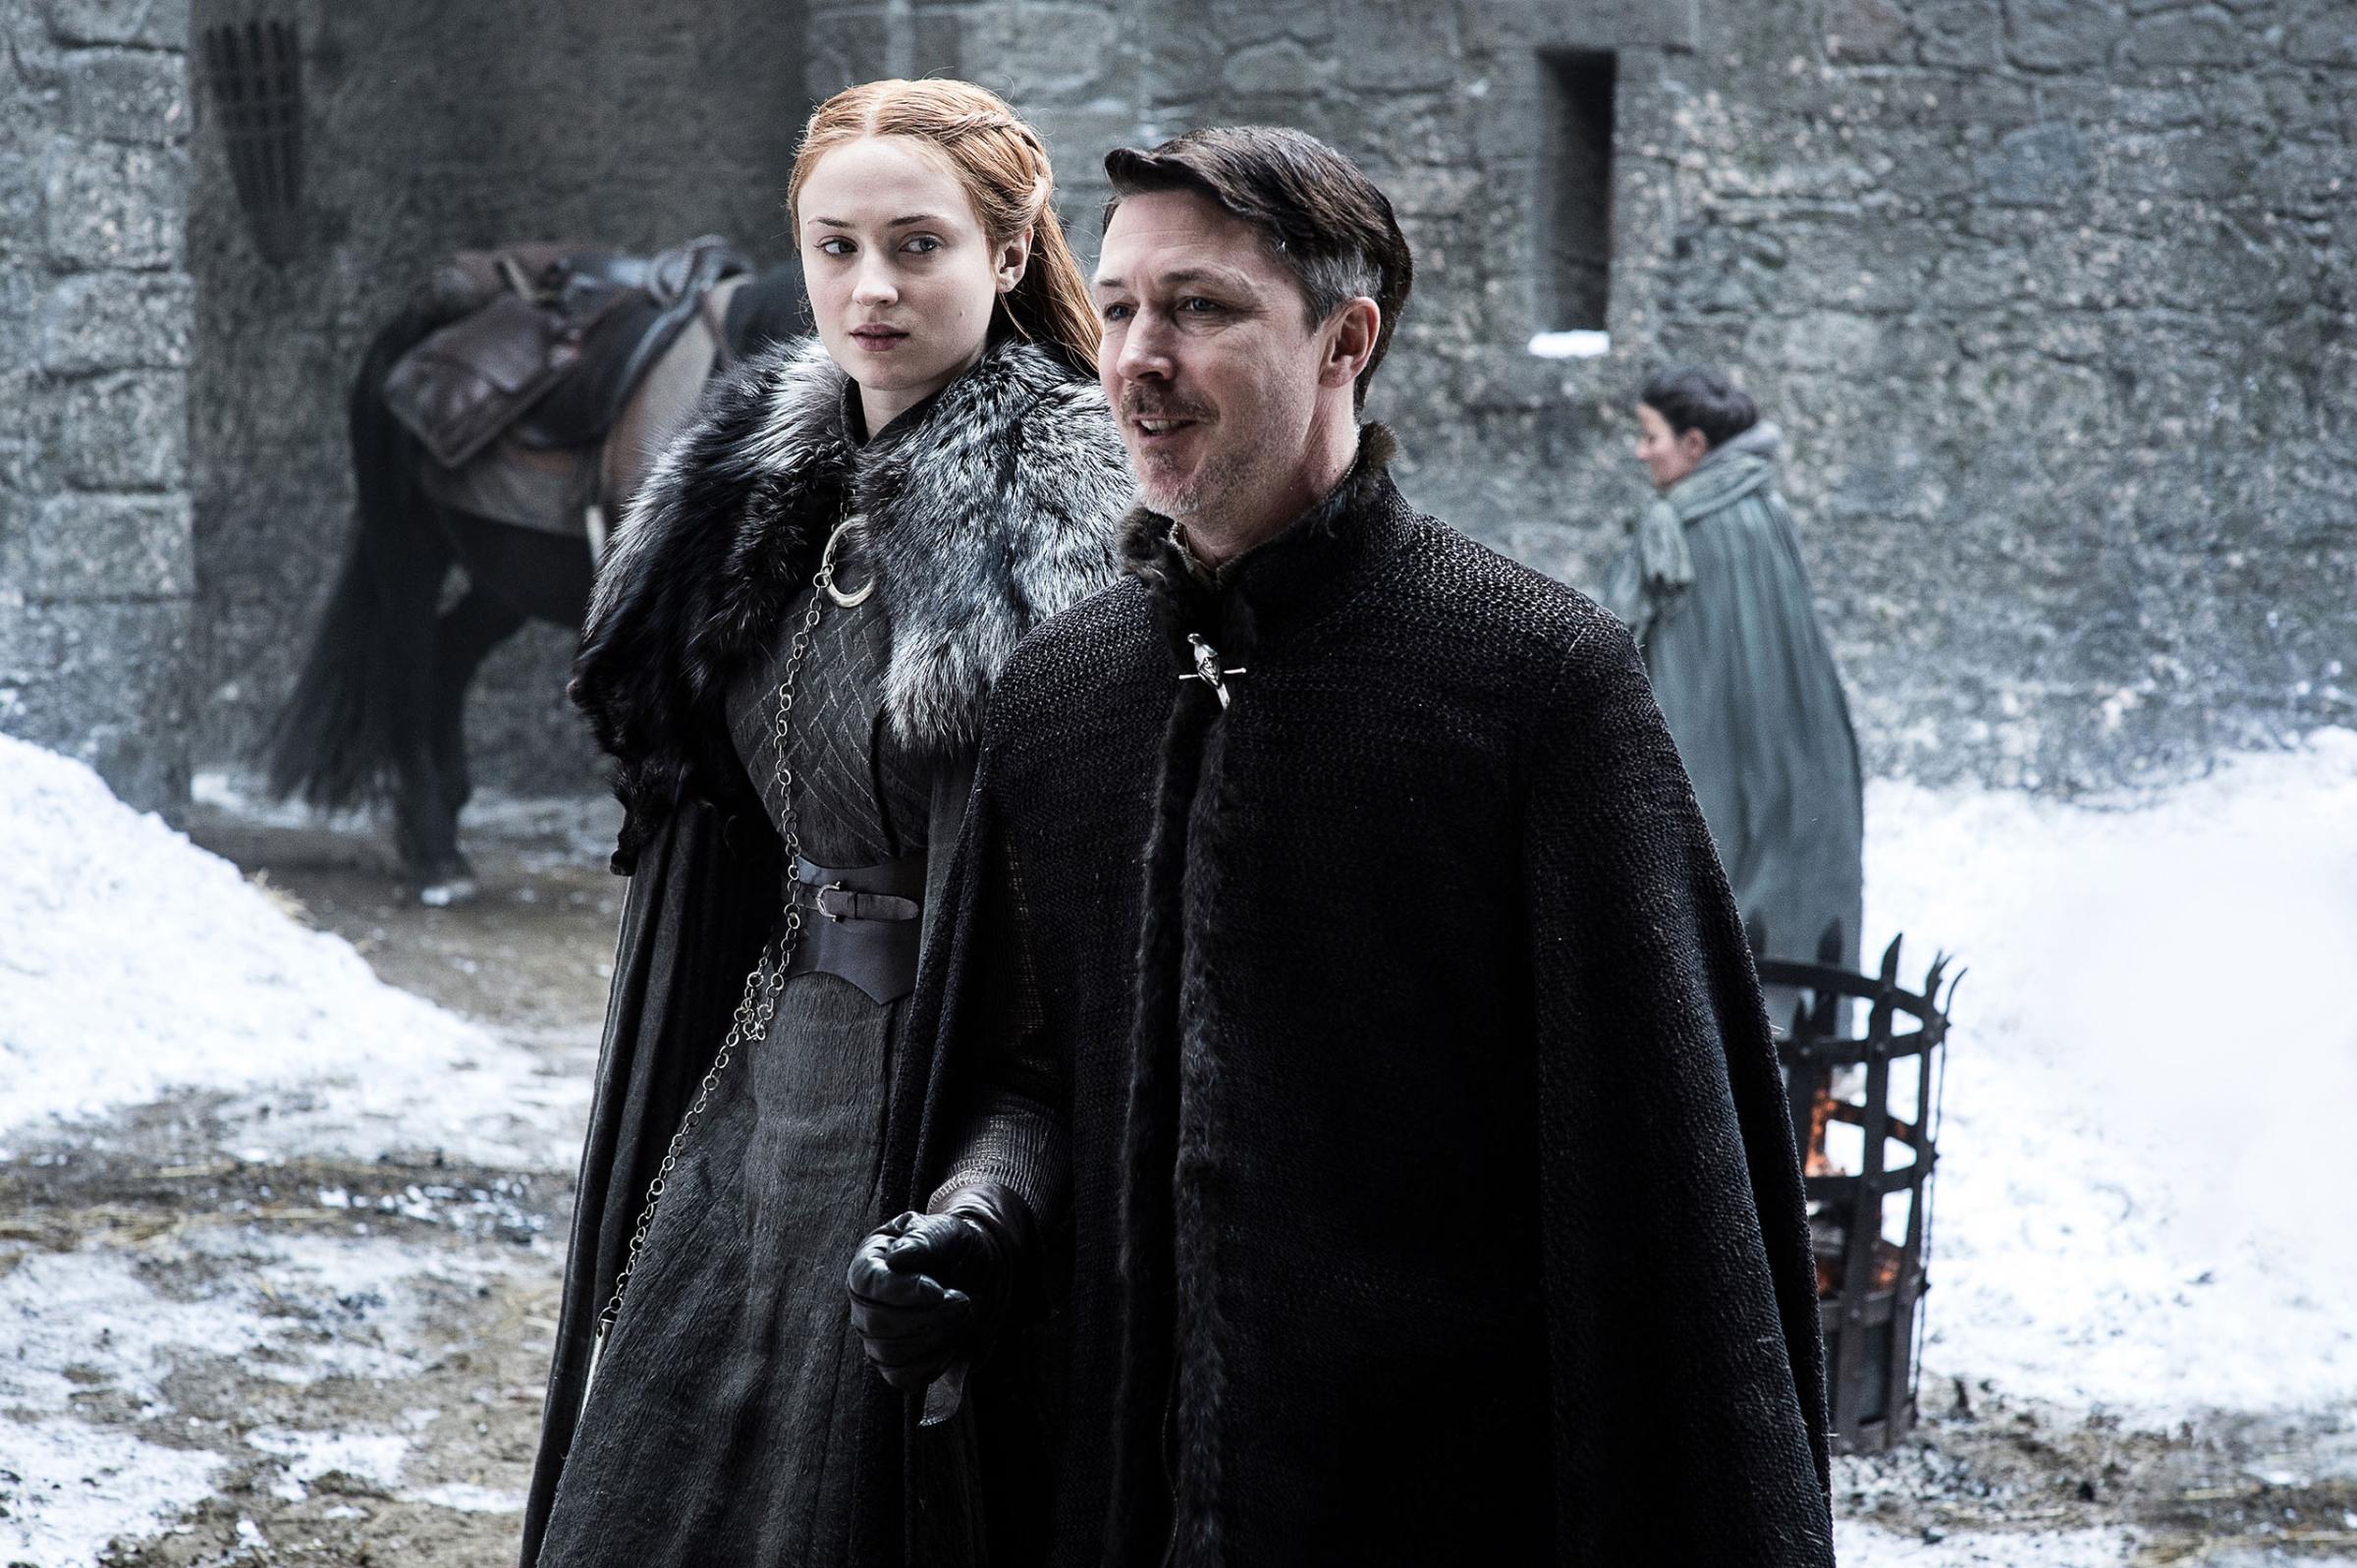 Sophie Turner and Aiden Gillen in Game of Thrones